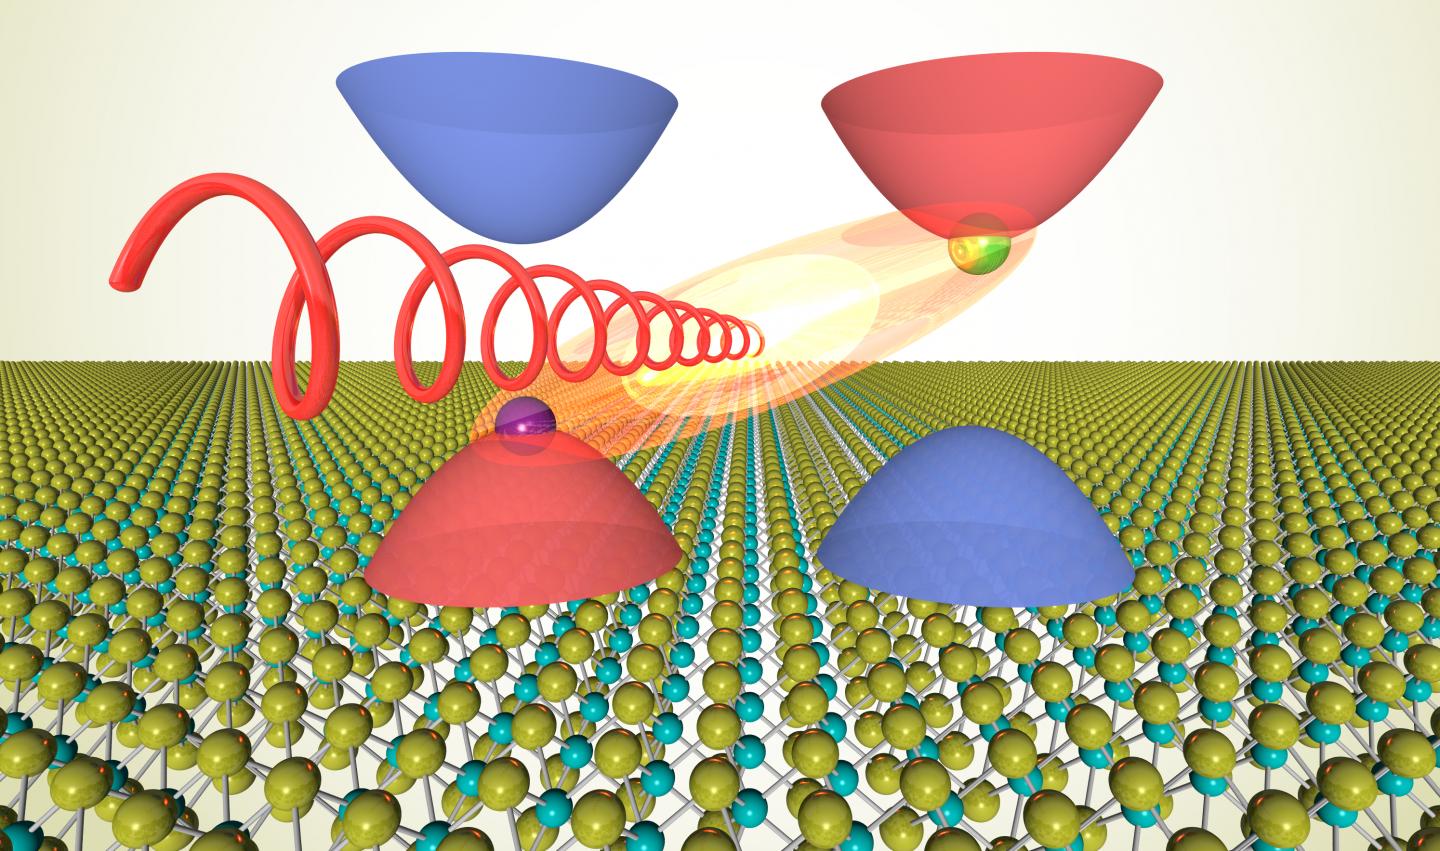 Image shows intervalley exciton light emission from monolayer WSe2. Monolayer WSe2 consists of a two-dimensional array of tungsten atoms (cyan balls) and selenium atoms (yellow balls). Its conduction and valence energy bands exhibit two valleys with opposite electron spins (red and blue cups). An electron (green ball) and a hole (purple ball) in the opposite valleys can be bound to form an intervalley exciton (orange-yellow ellipsoid), which decays to emit light with circular polarization (red spiral).

CREDIT
Erfu Liu, UC Riverside.